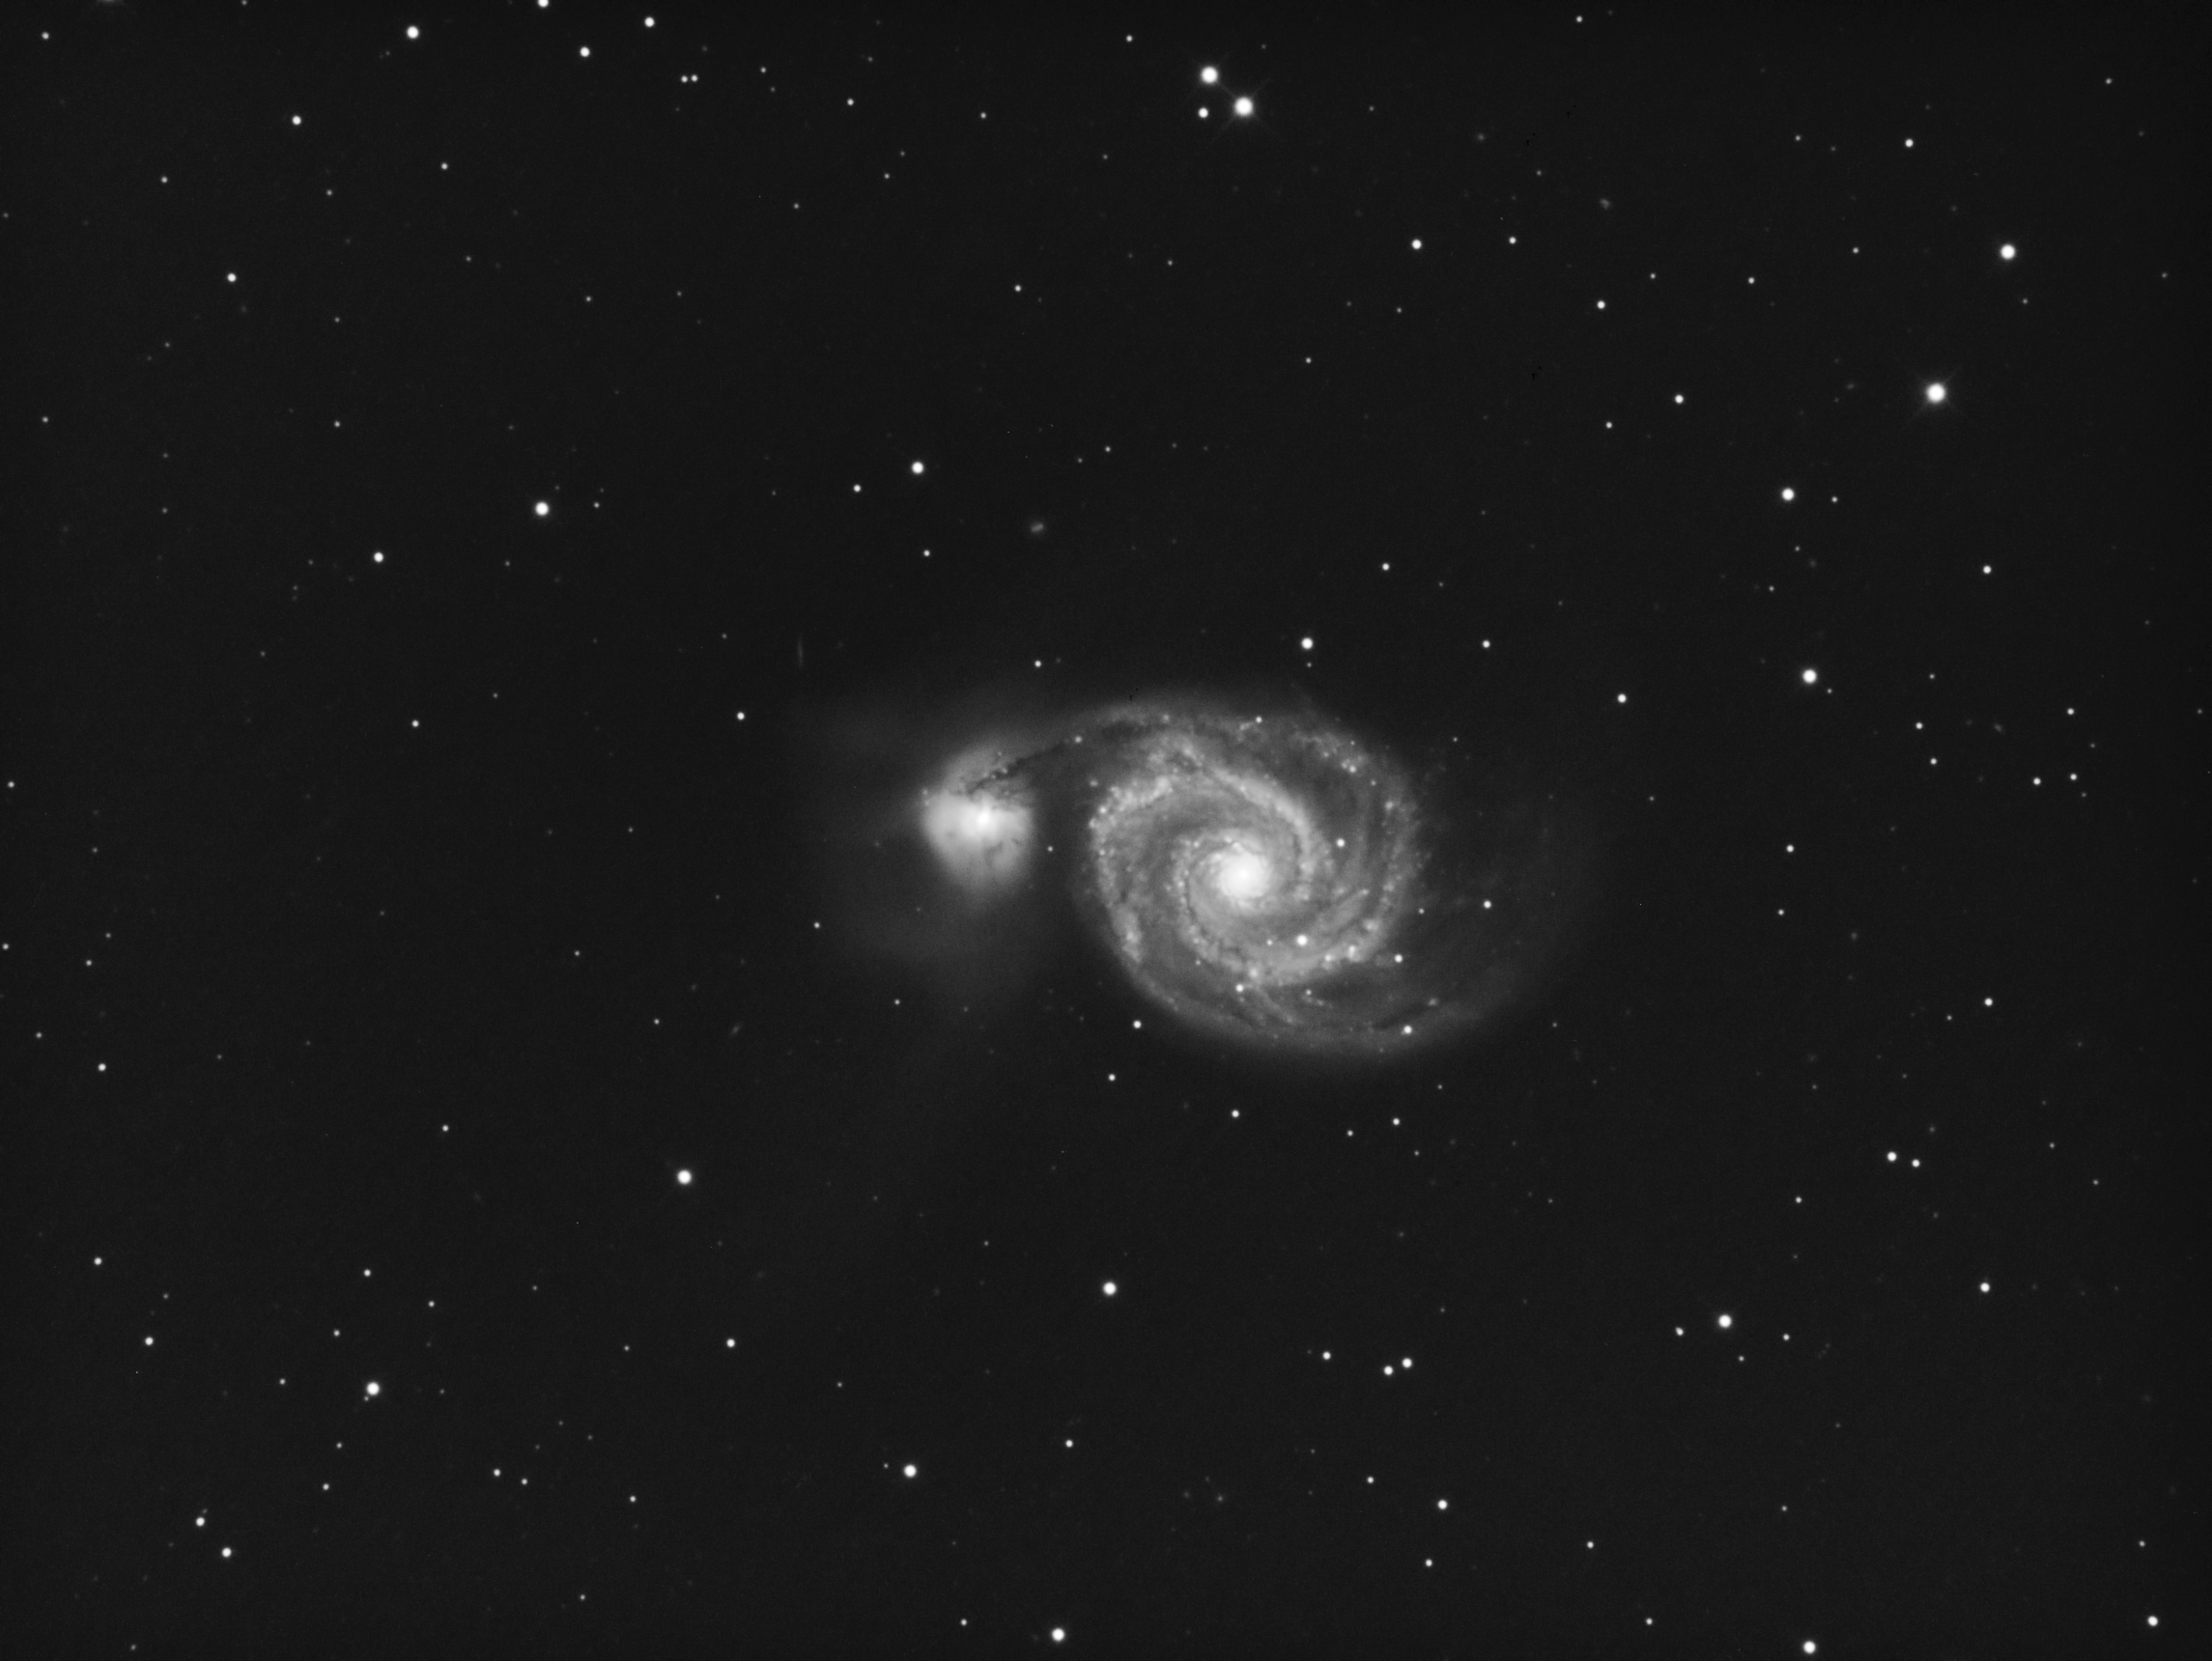 Help choose a good scope to image galaxies - Getting Started Equipment ...